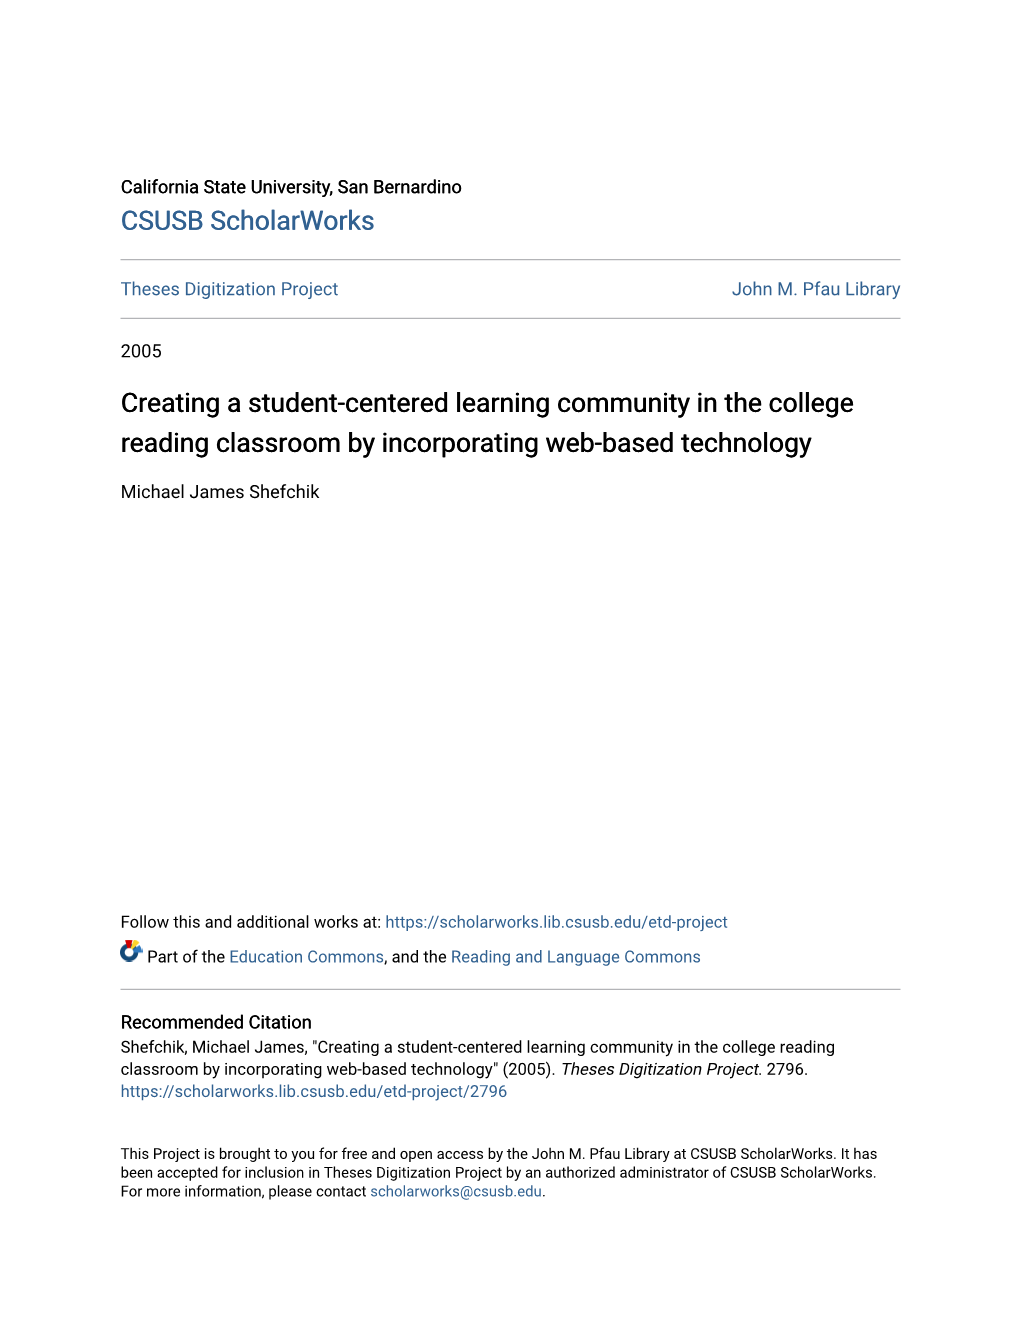 Creating a Student-Centered Learning Community in the College Reading Classroom by Incorporating Web-Based Technology